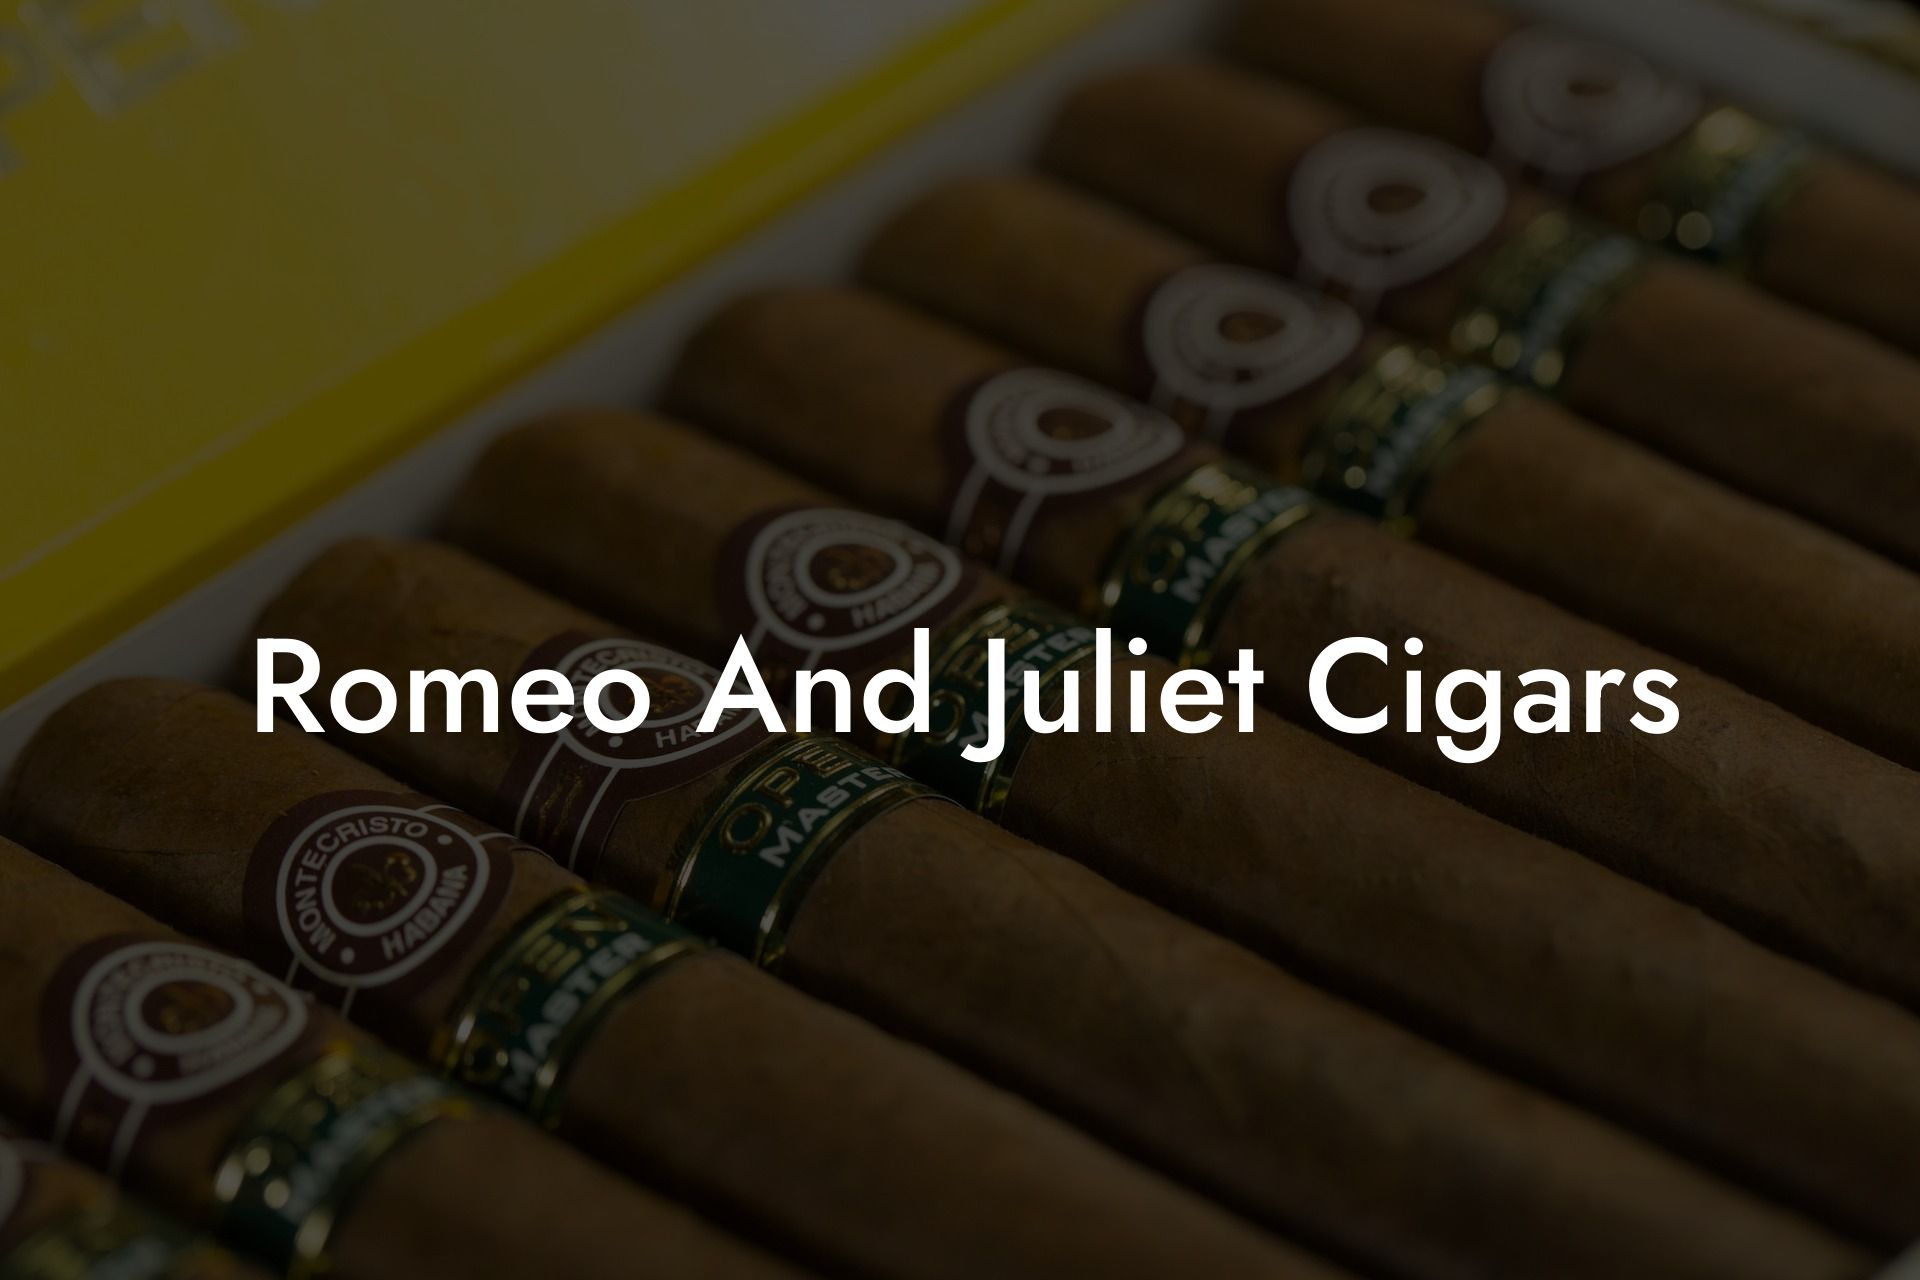 Romeo And Juliet Cigars